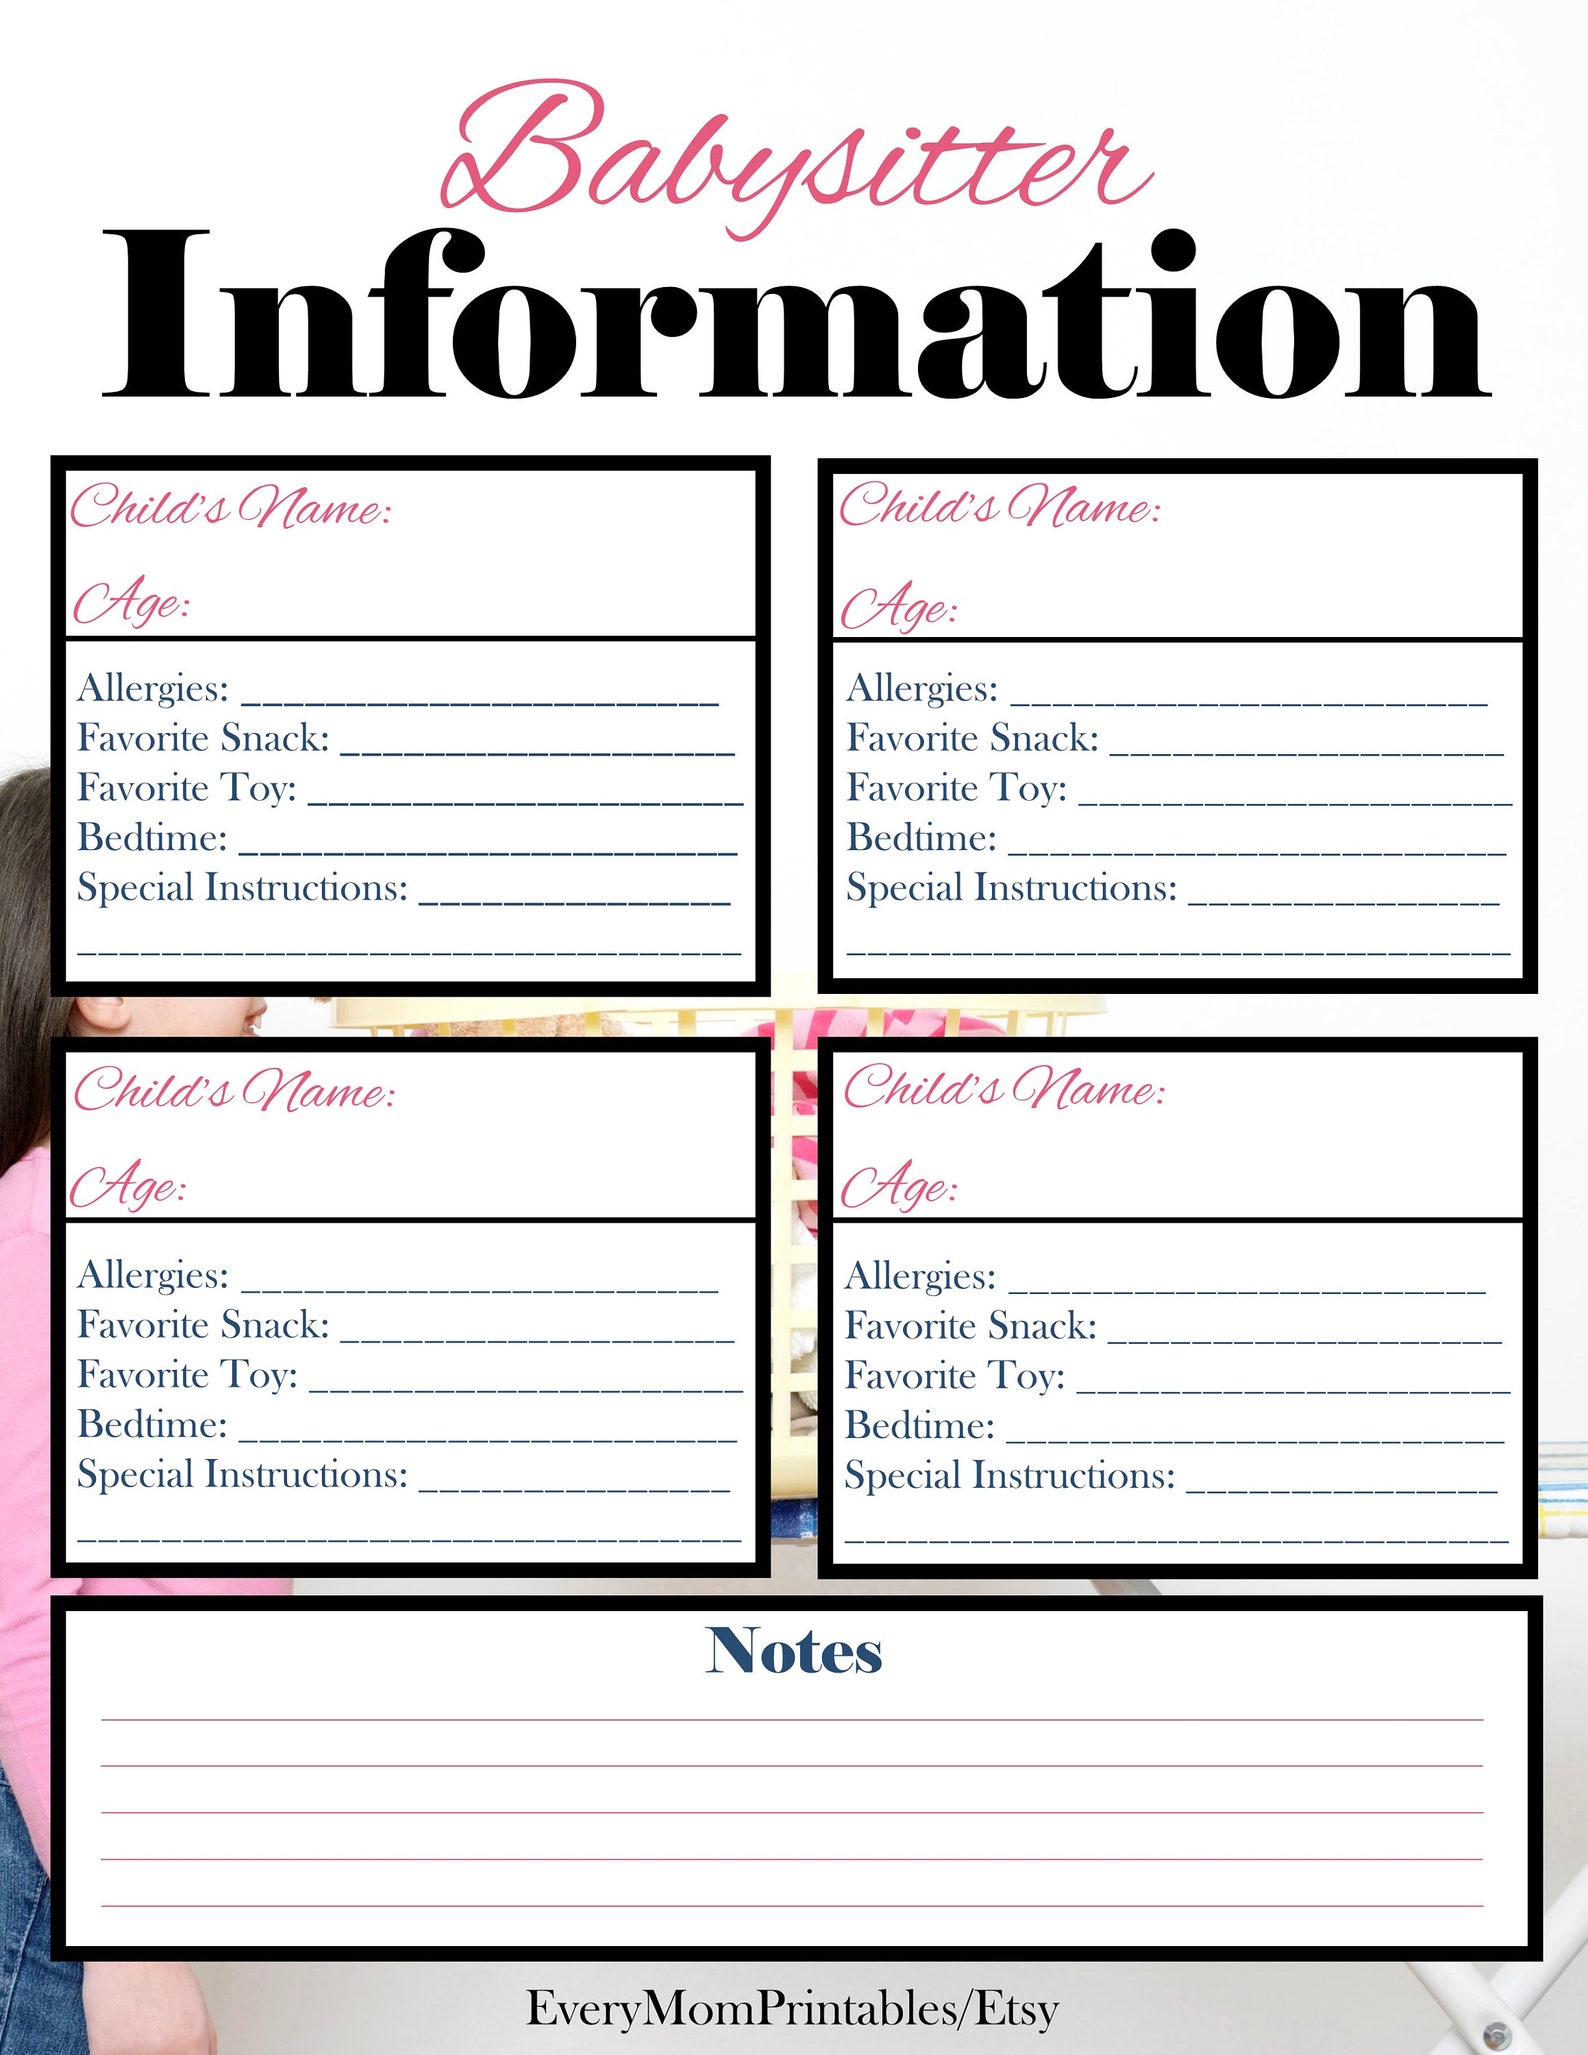 babysitter-forms-printable-free-printable-forms-free-online